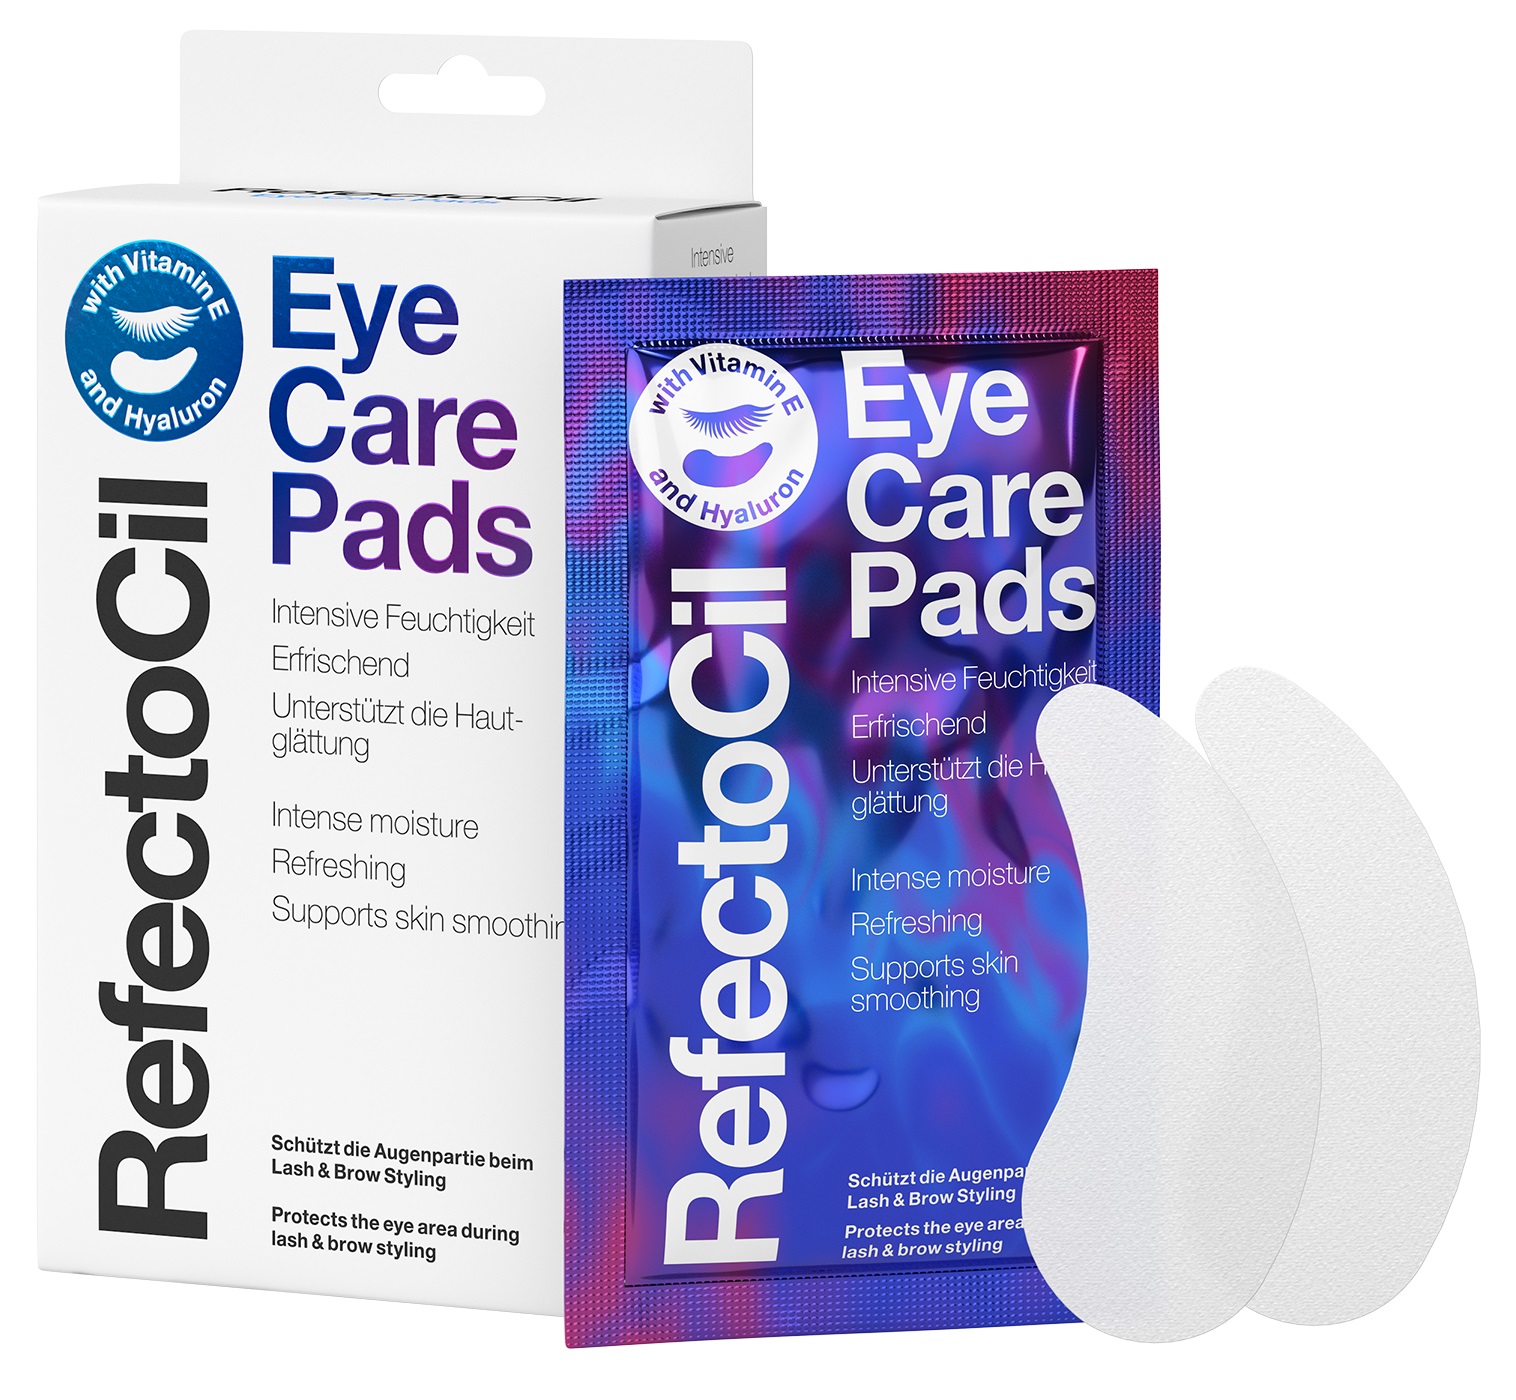 RefectoCil Eye Care Pads